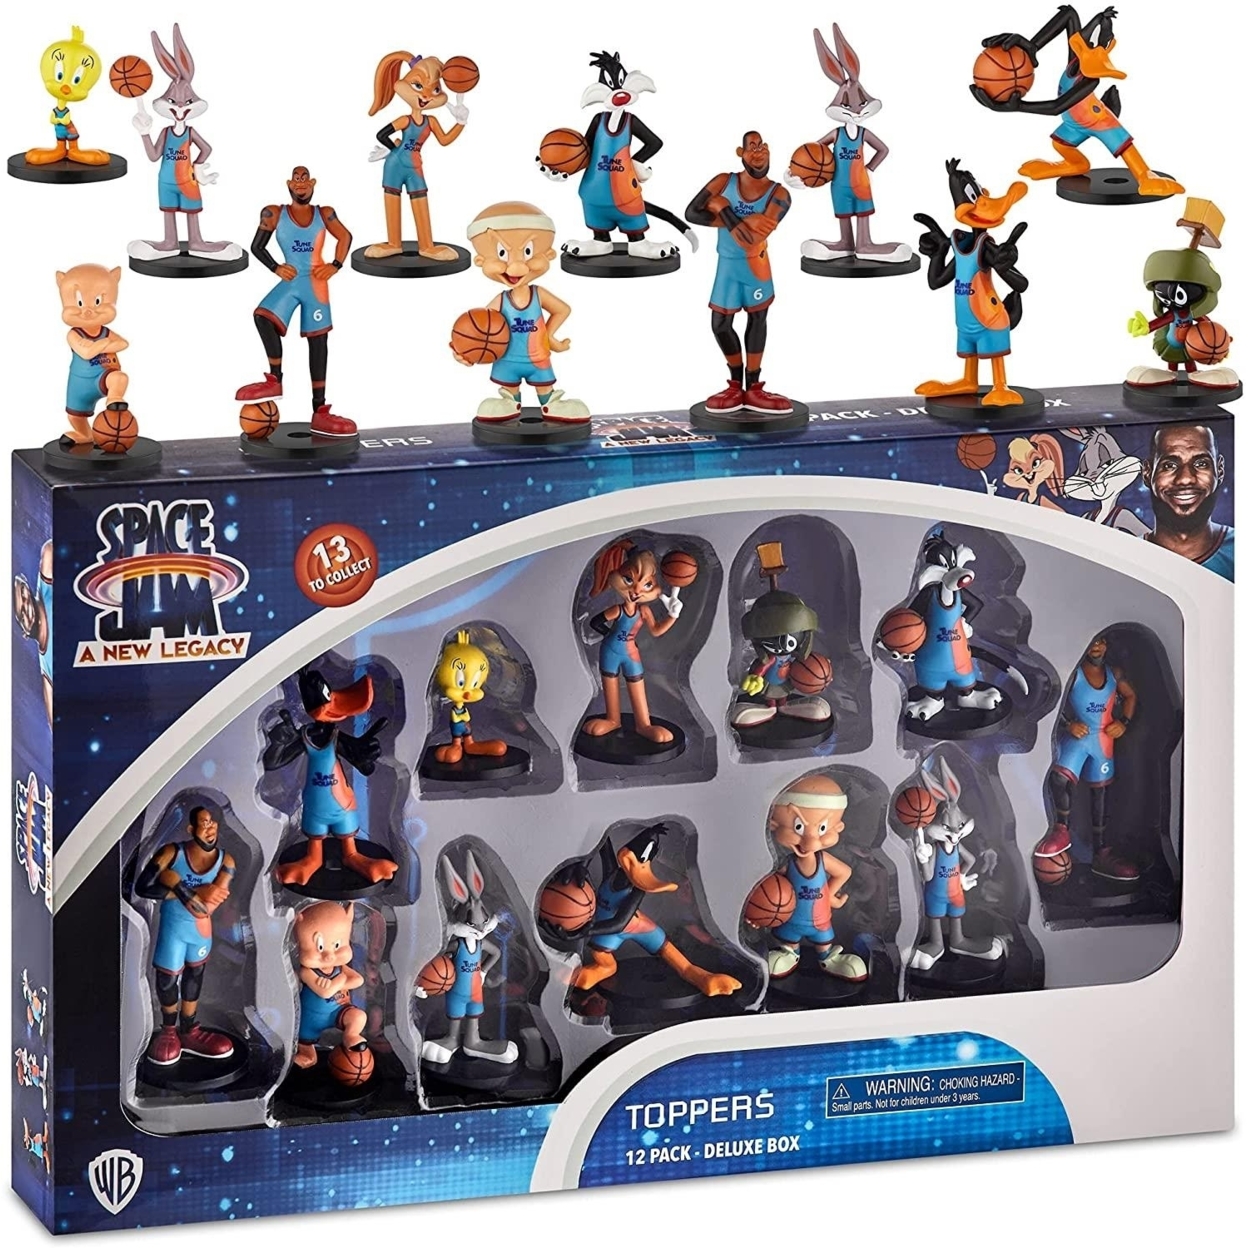 Space Jam A New Legacy Pencil Toppers 12pk Movie Characters Deluxe Box Set PMI International